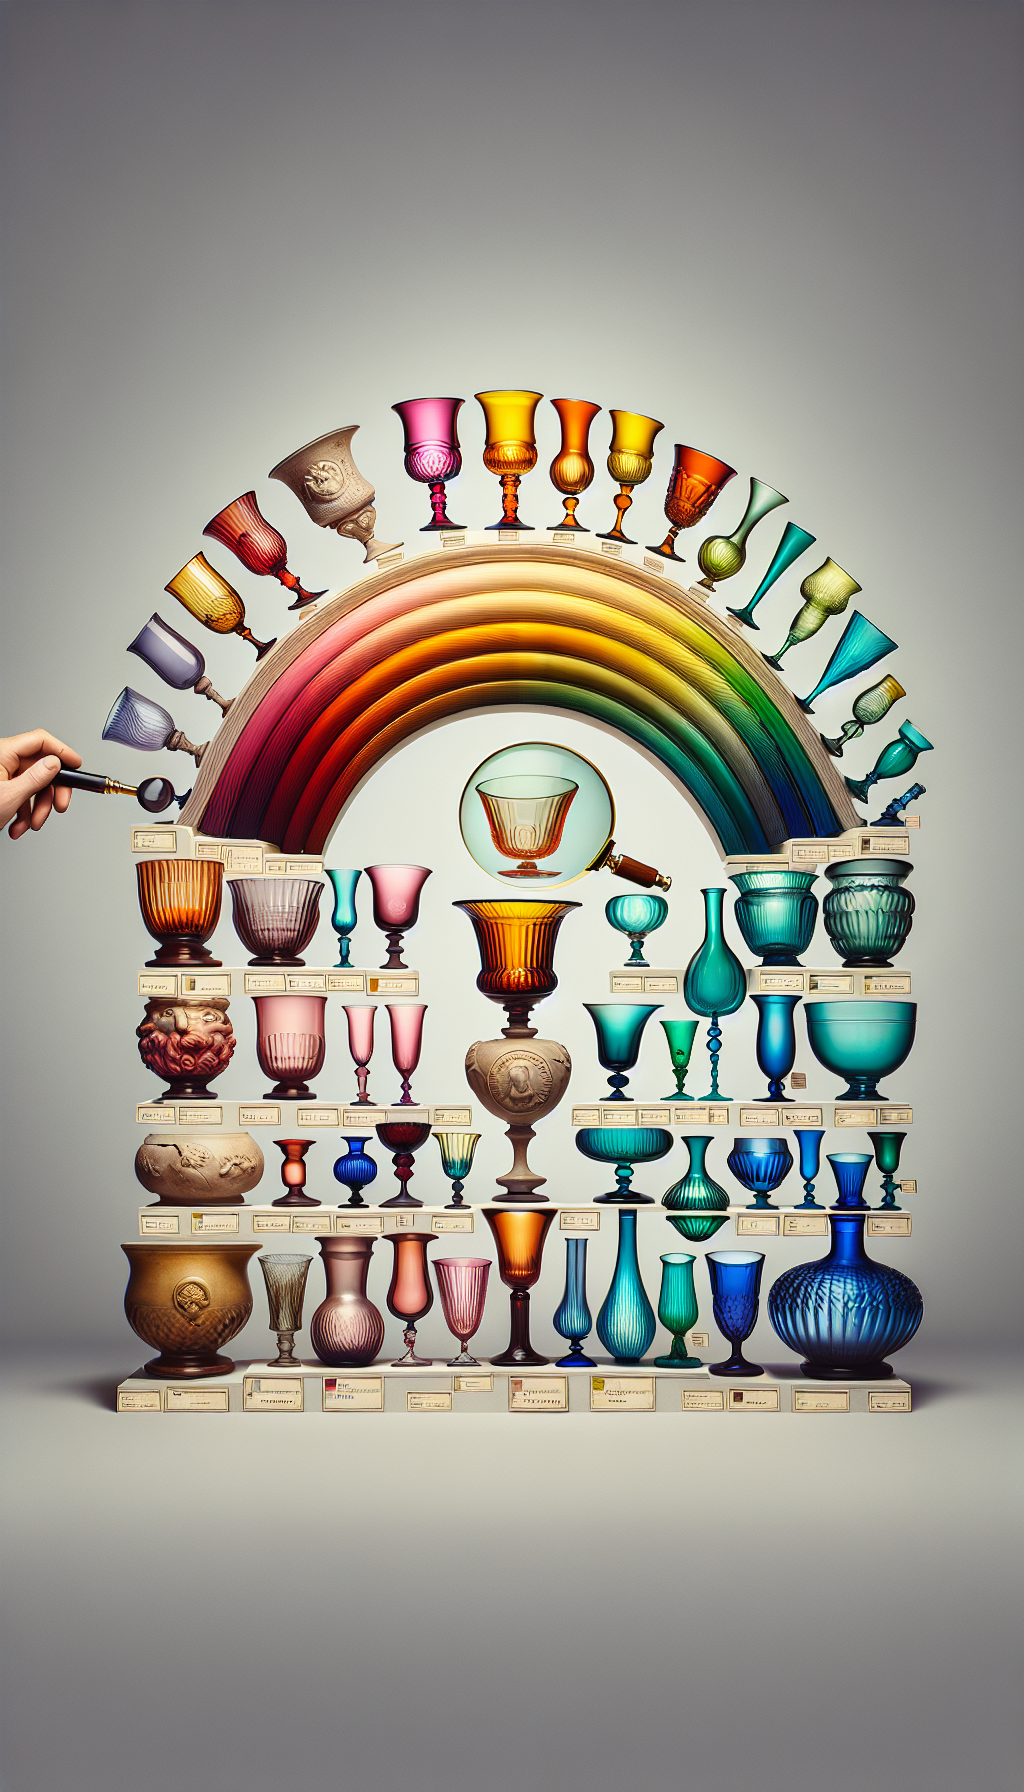 An elegant cascade of antique glassware, each piece a different hue from the vintage spectrum, is arranged in a graceful arch that mimics a color wheel. Faintly labeled beneath each piece are their historical periods, with a magnifying glass hovering over a Roman goblet, subtly emphasizing the theme of identification amidst the vibrant array of antiquity's colors.